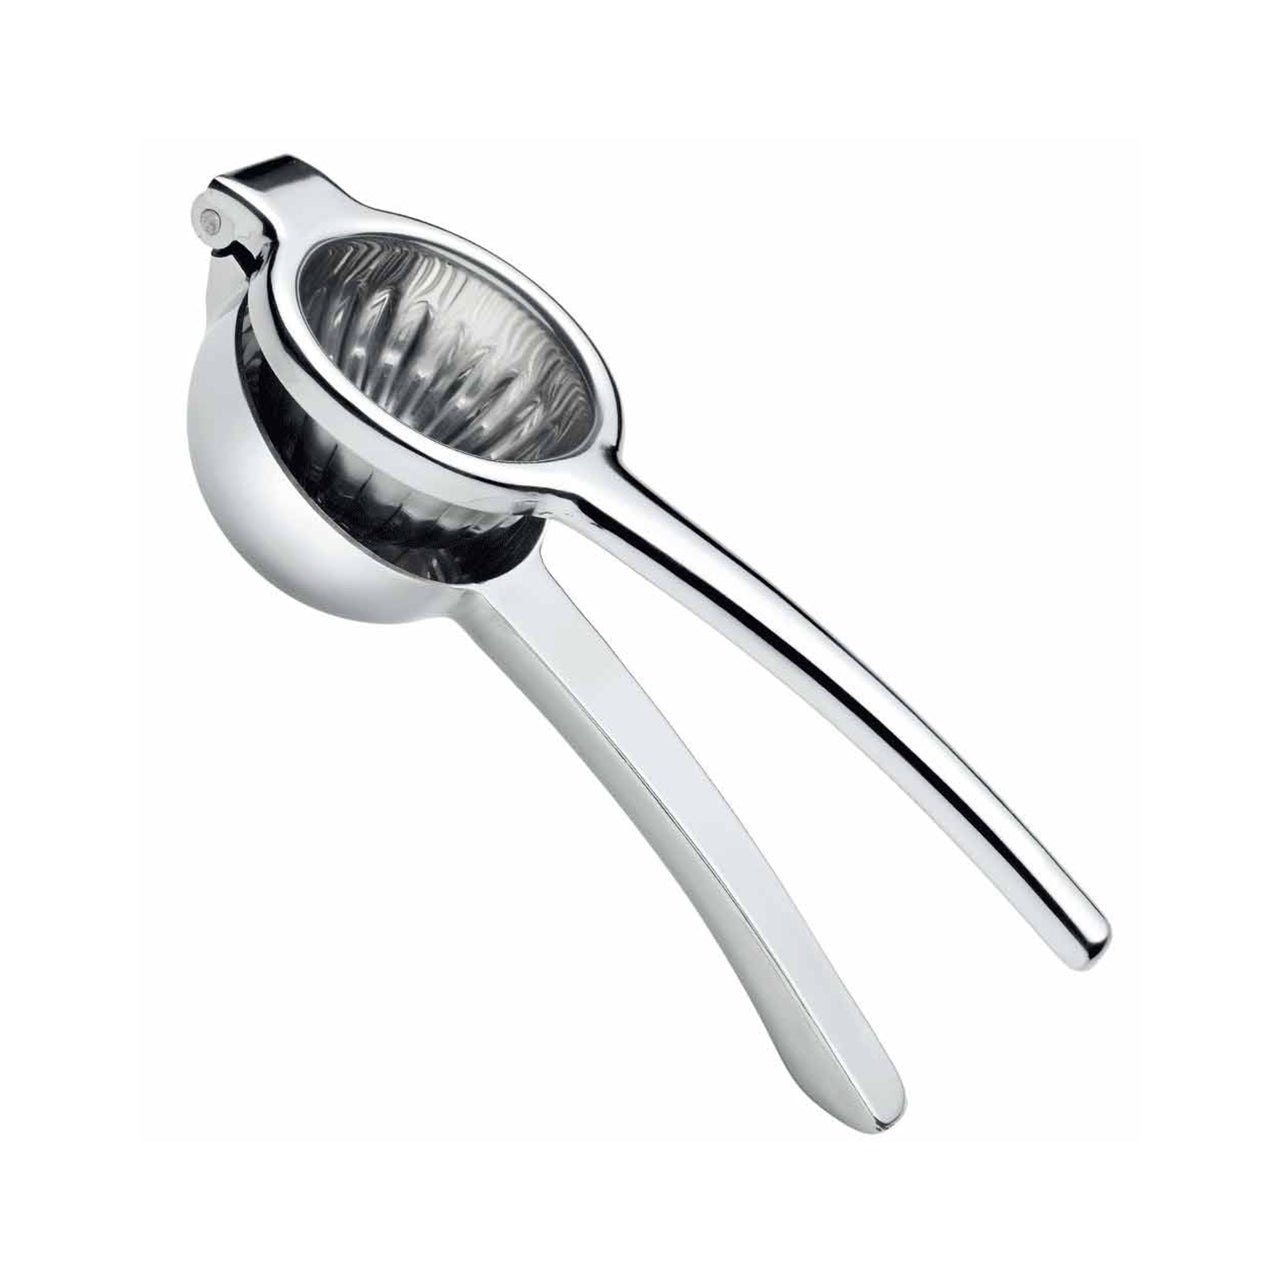 Stainless Steel Lemon / Lime Squeezer